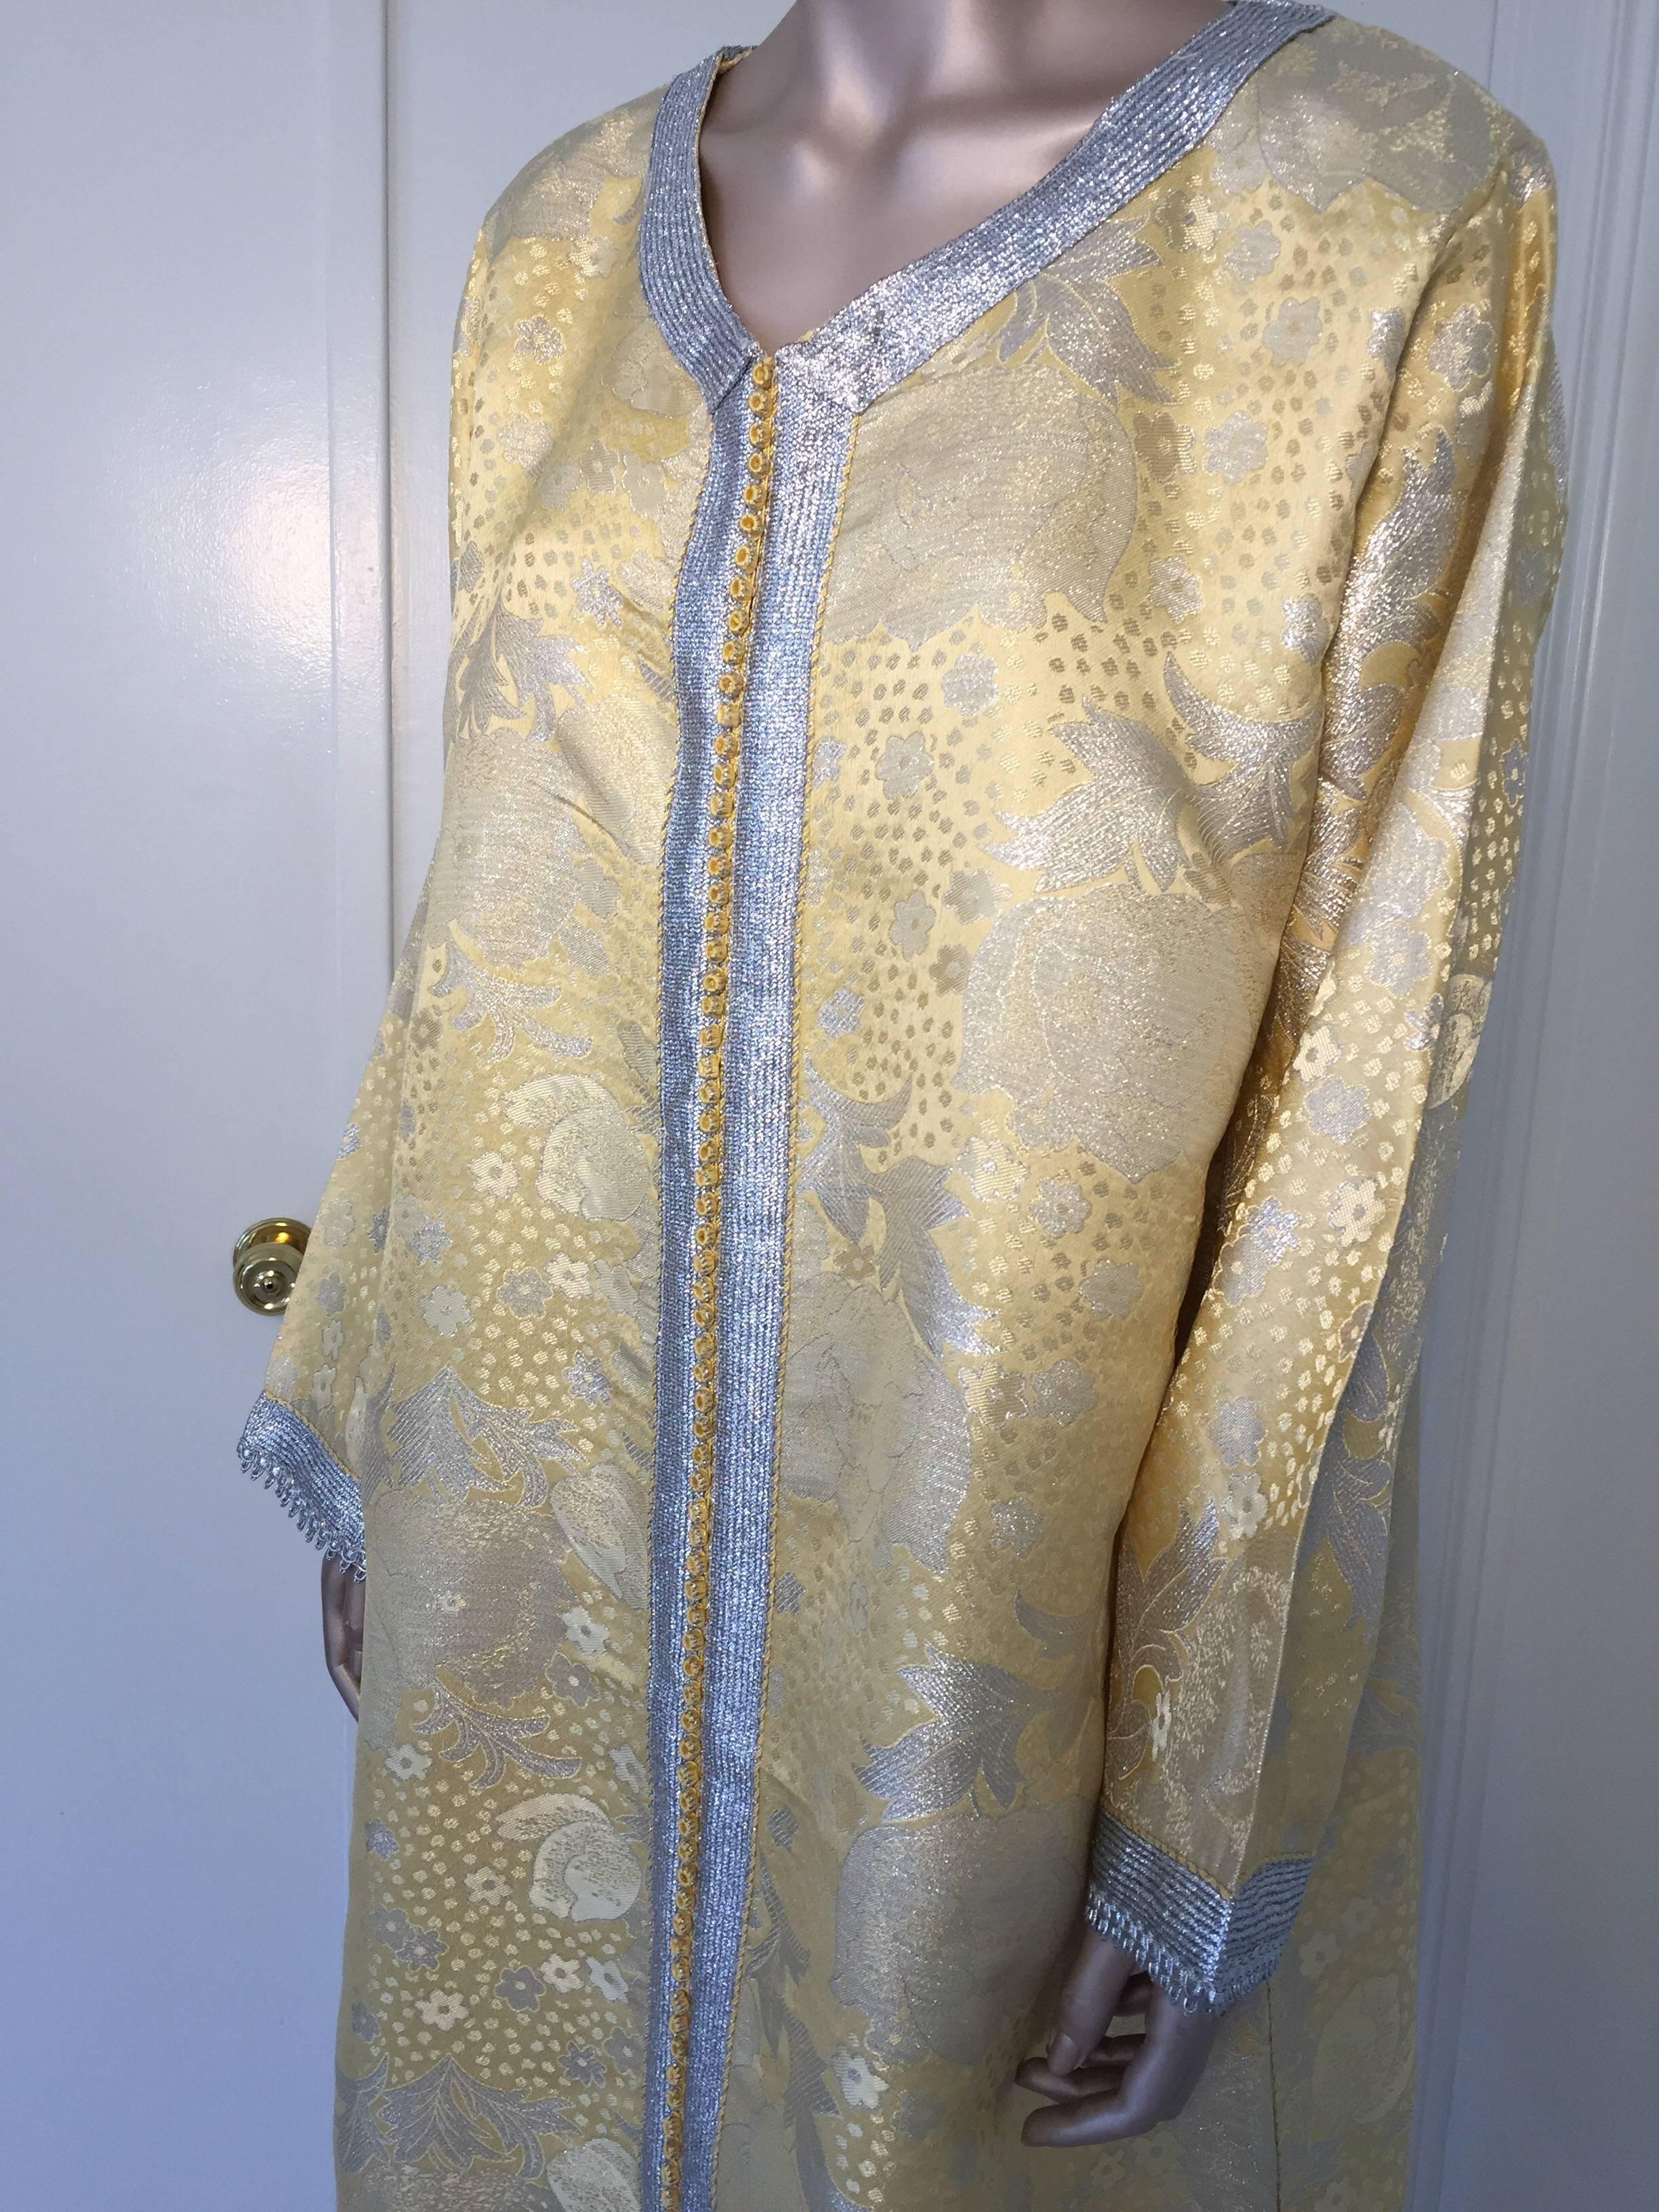 gold and silver brocade dress